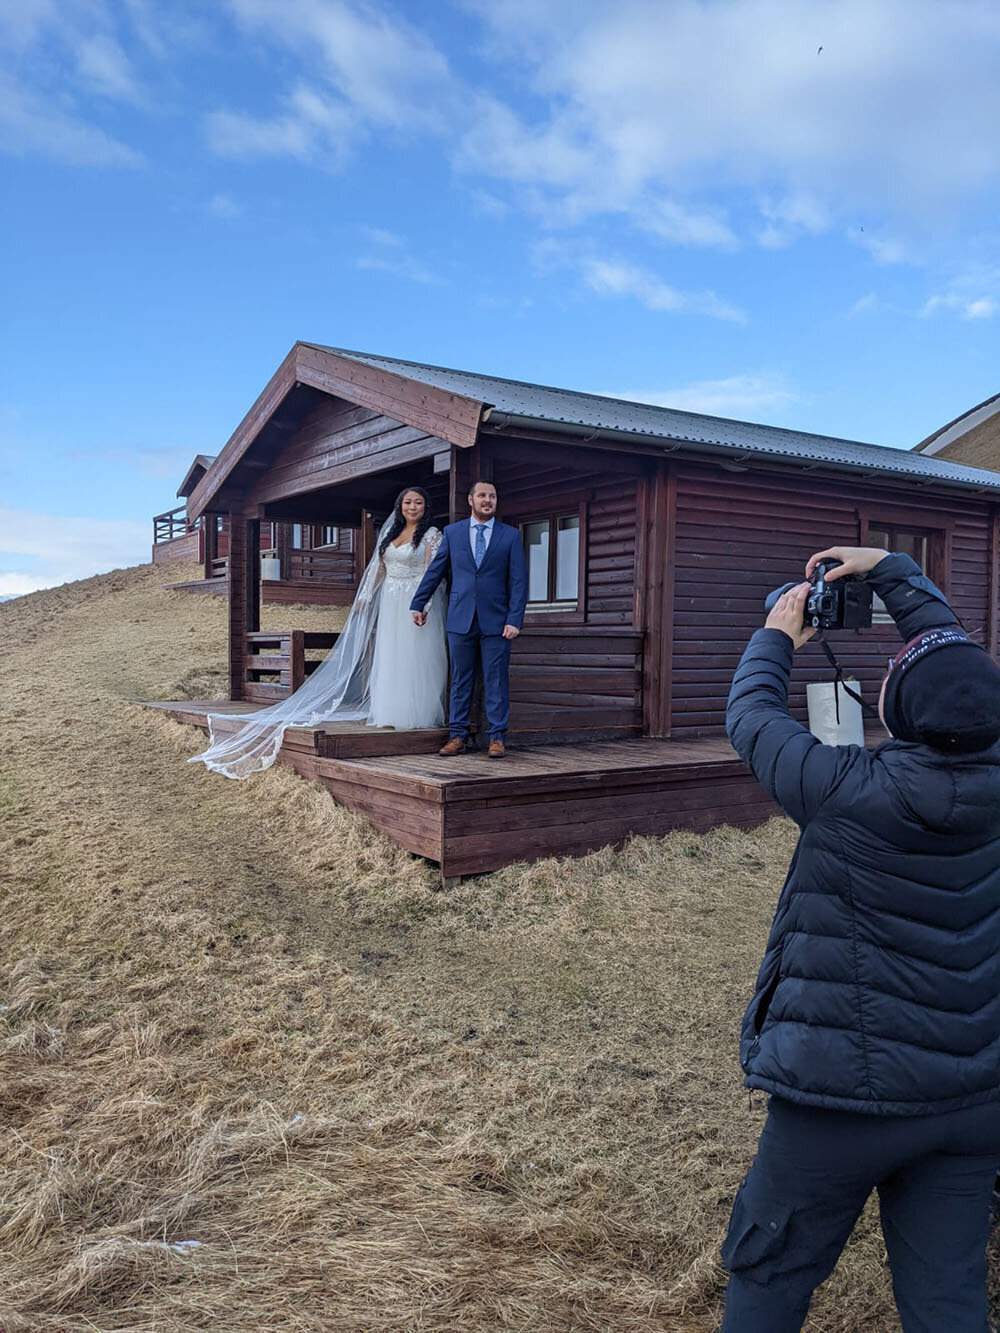 A Virginia wedding photographer takes photos of a couple during a first touch moment outside of their Airbnb cabin in Iceland.